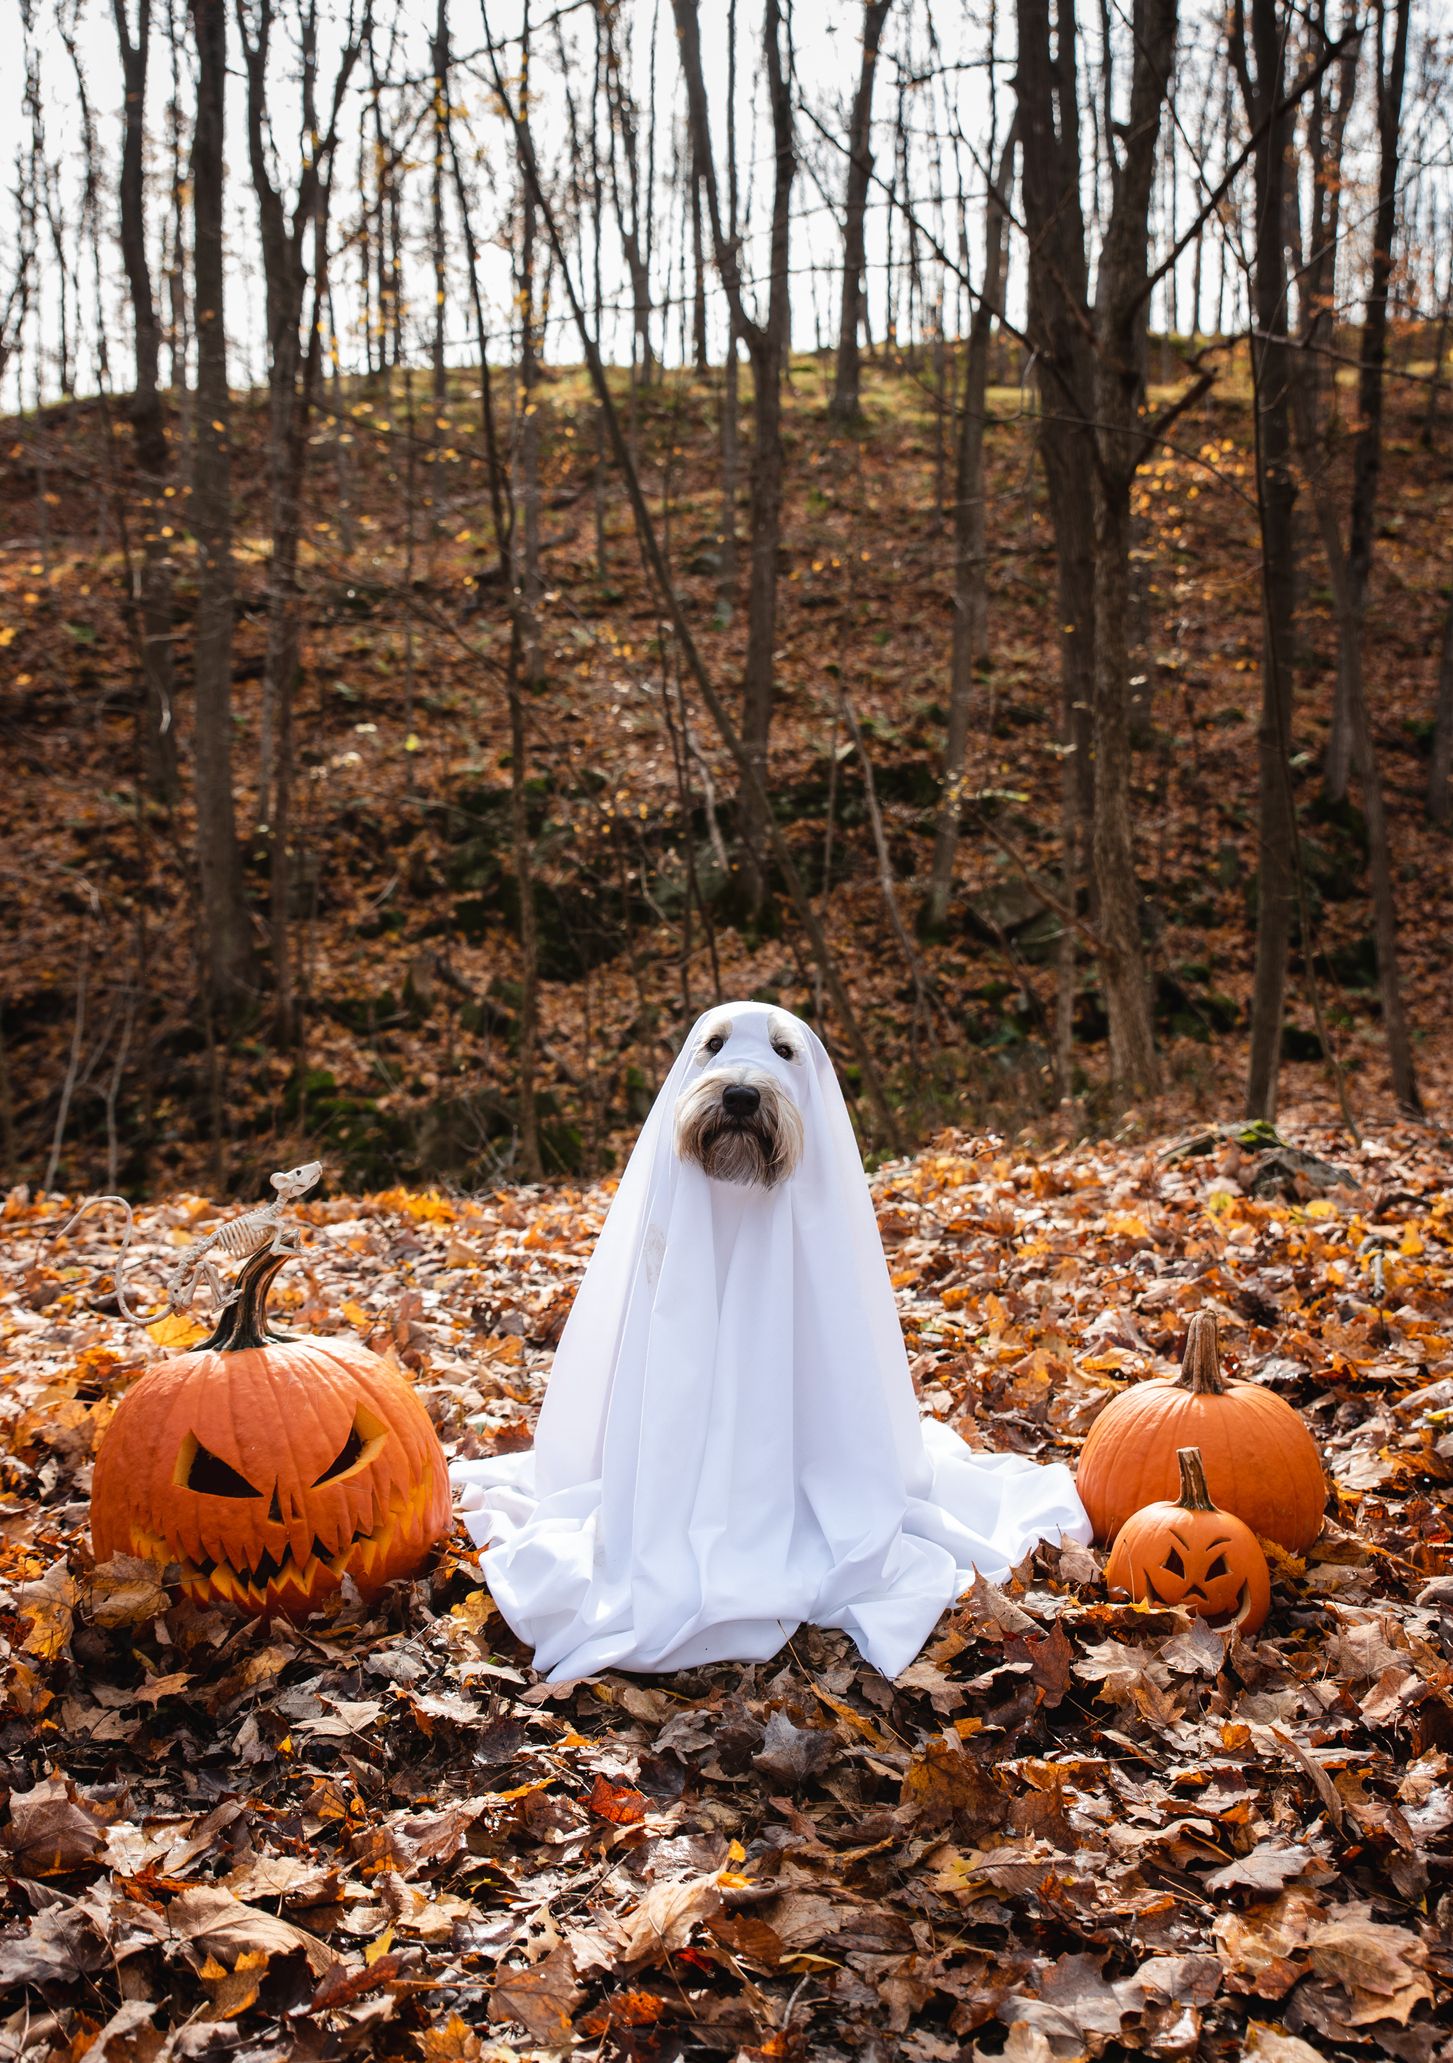 125 Funny Halloween Puns - Clever, Cute Puns for Halloween